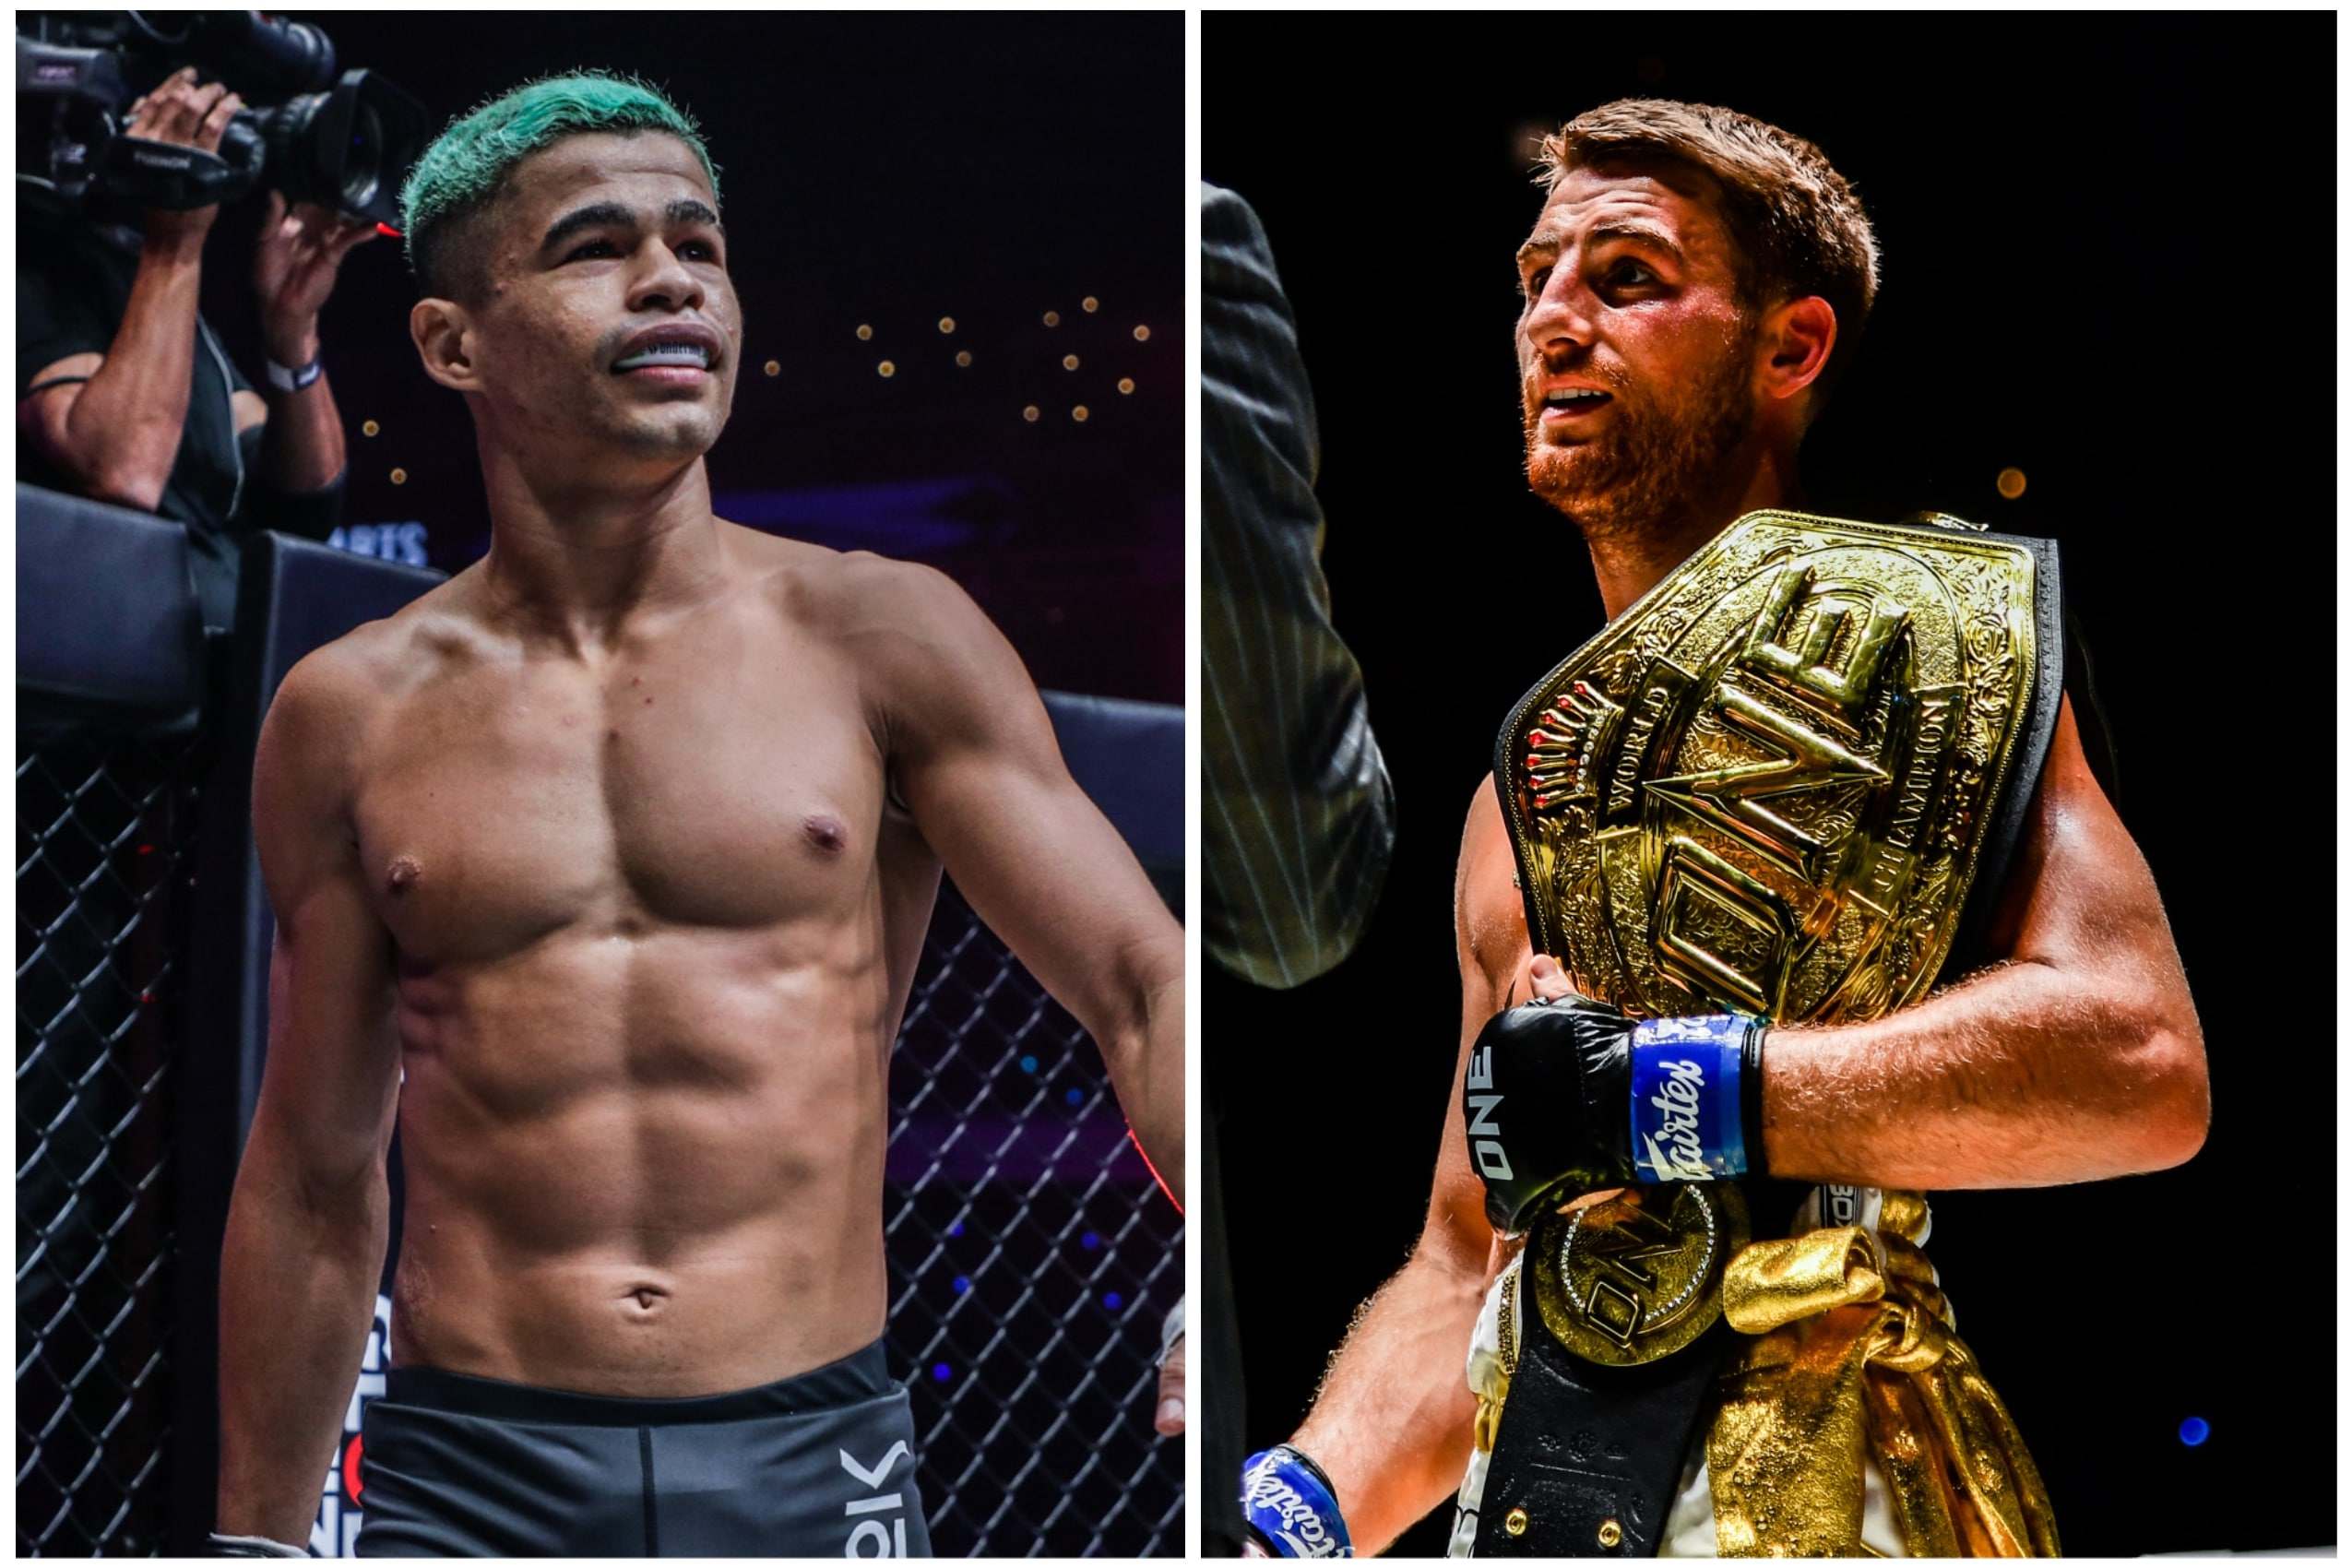 Fabricio Andrade and Jonathan Haggerty (right) have exchanged call-outs on social media. Photos: ONE Championship